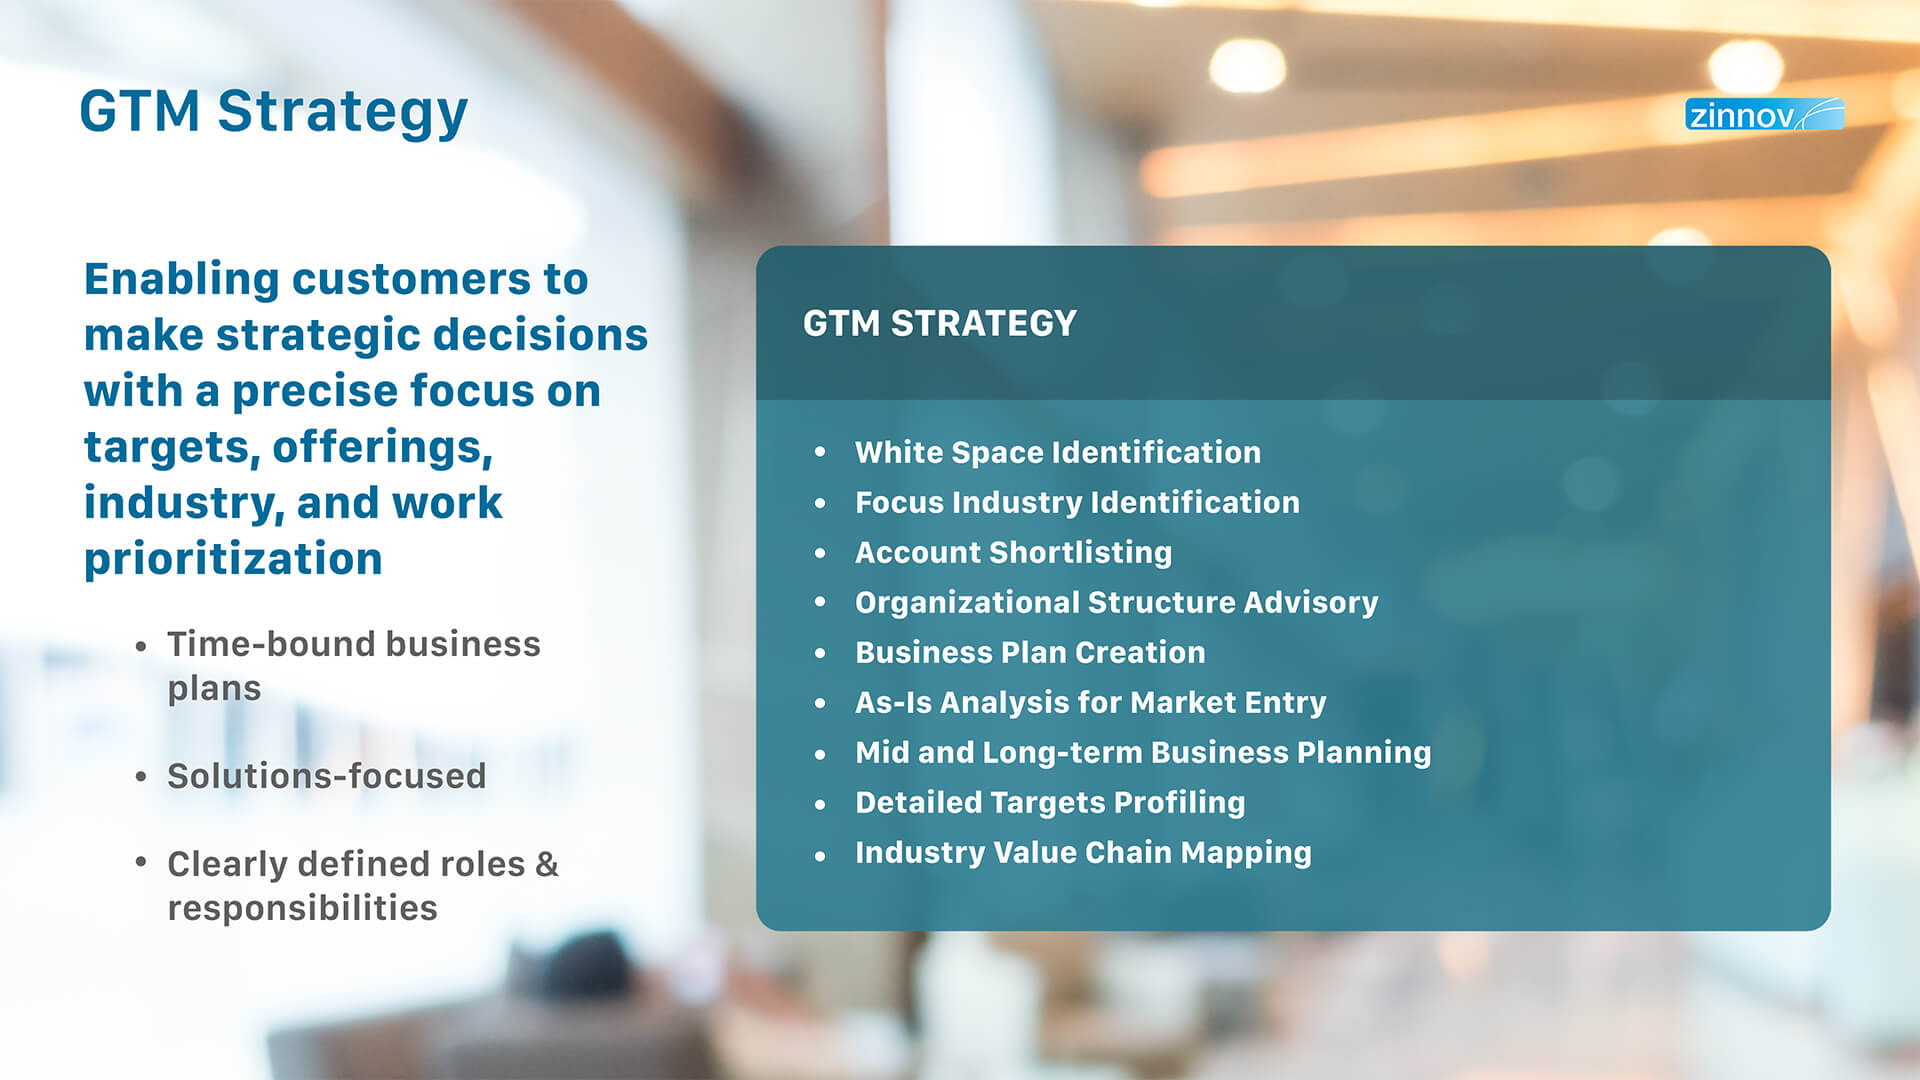 GTM Strategy